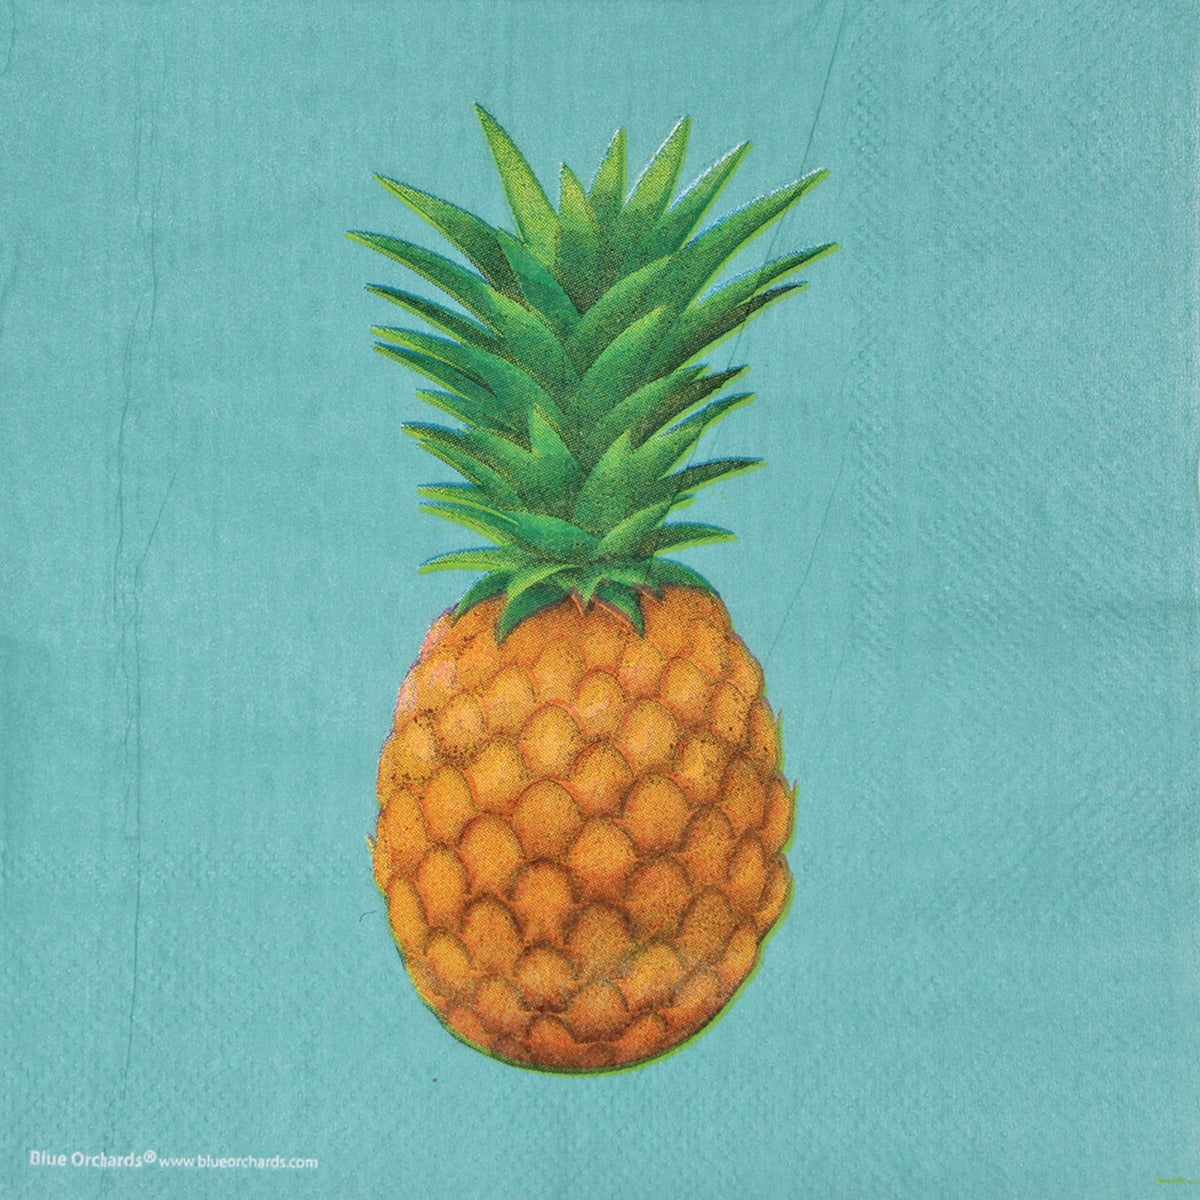  pineapple party supplies packs